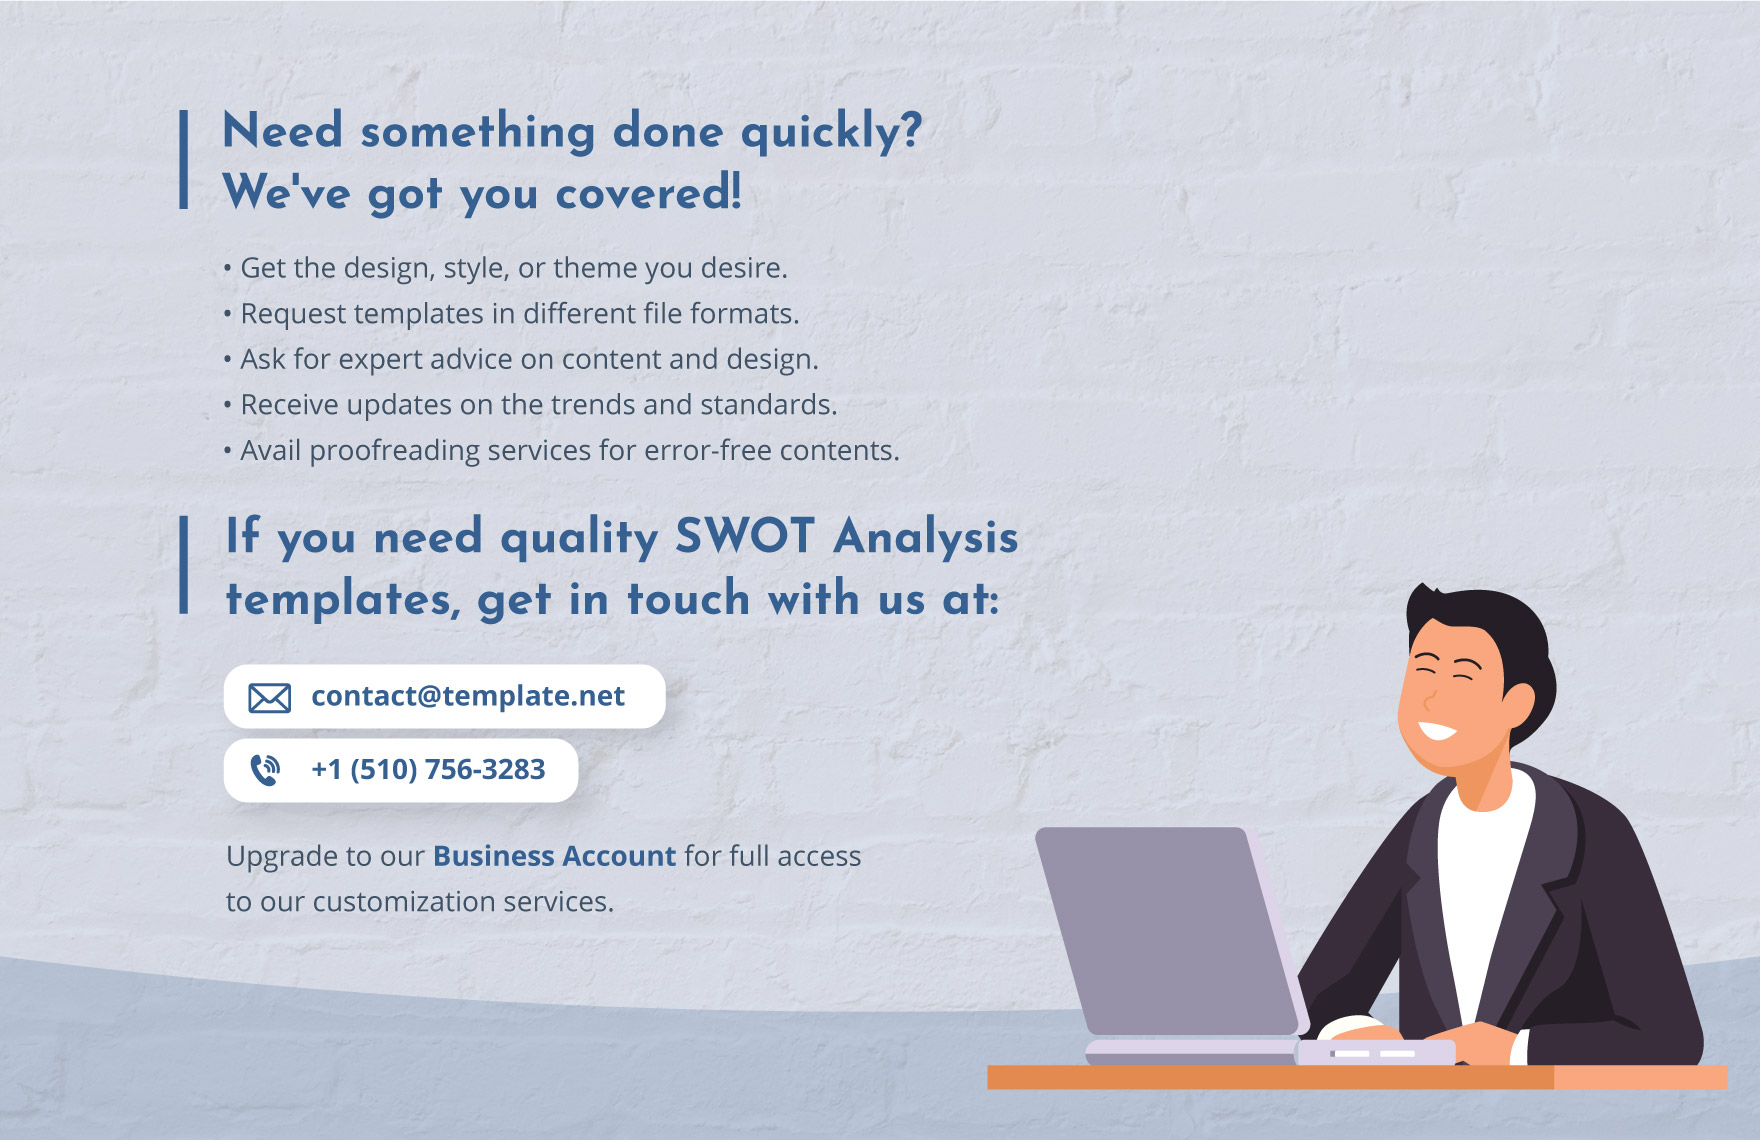 Managed IT Services Provider (MSP) SWOT Analysis Template